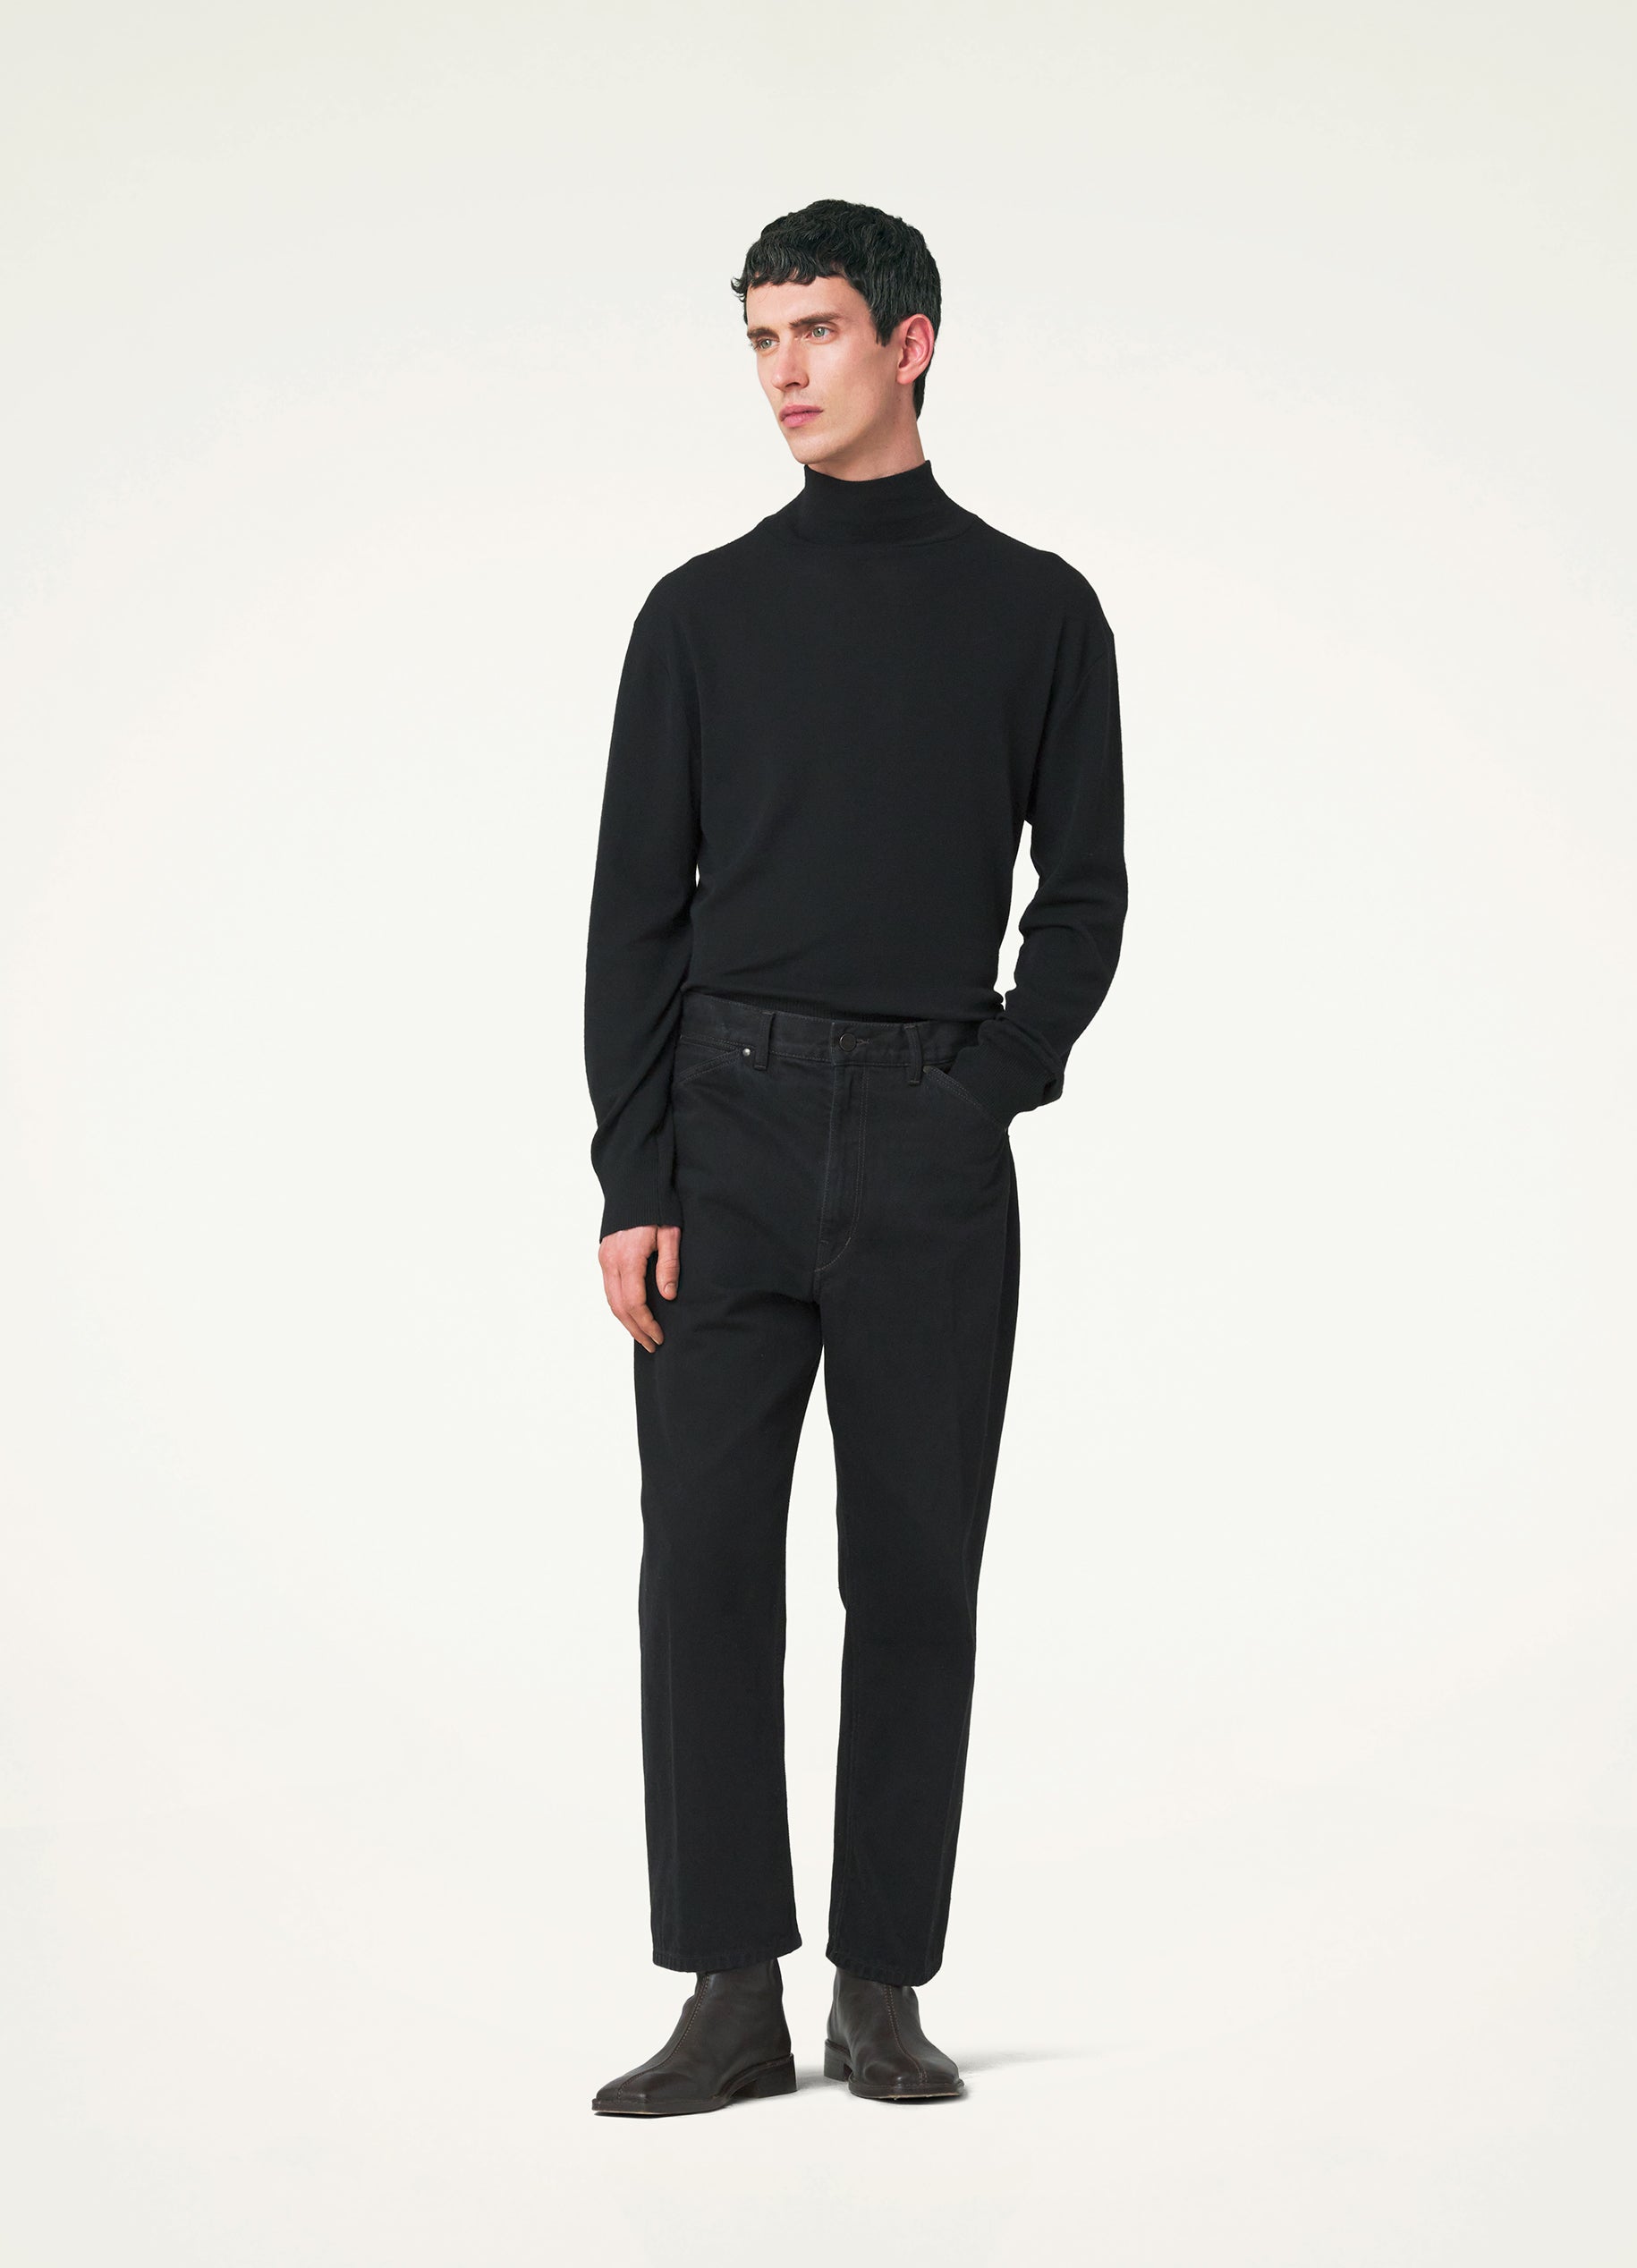 Lemaire Curved 5 Pocket Pants Black – Opia